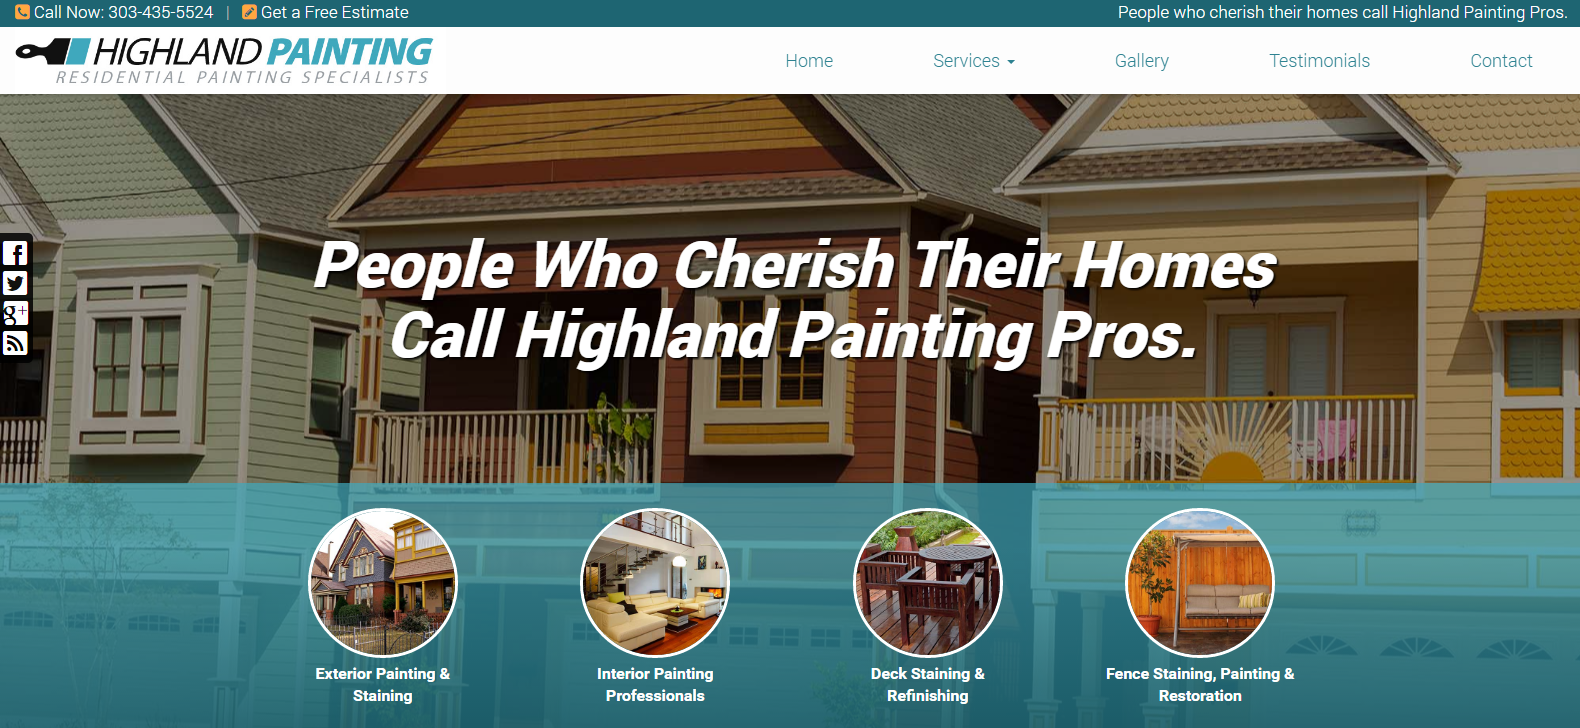 
New Website Launched: Highland Painting Pros